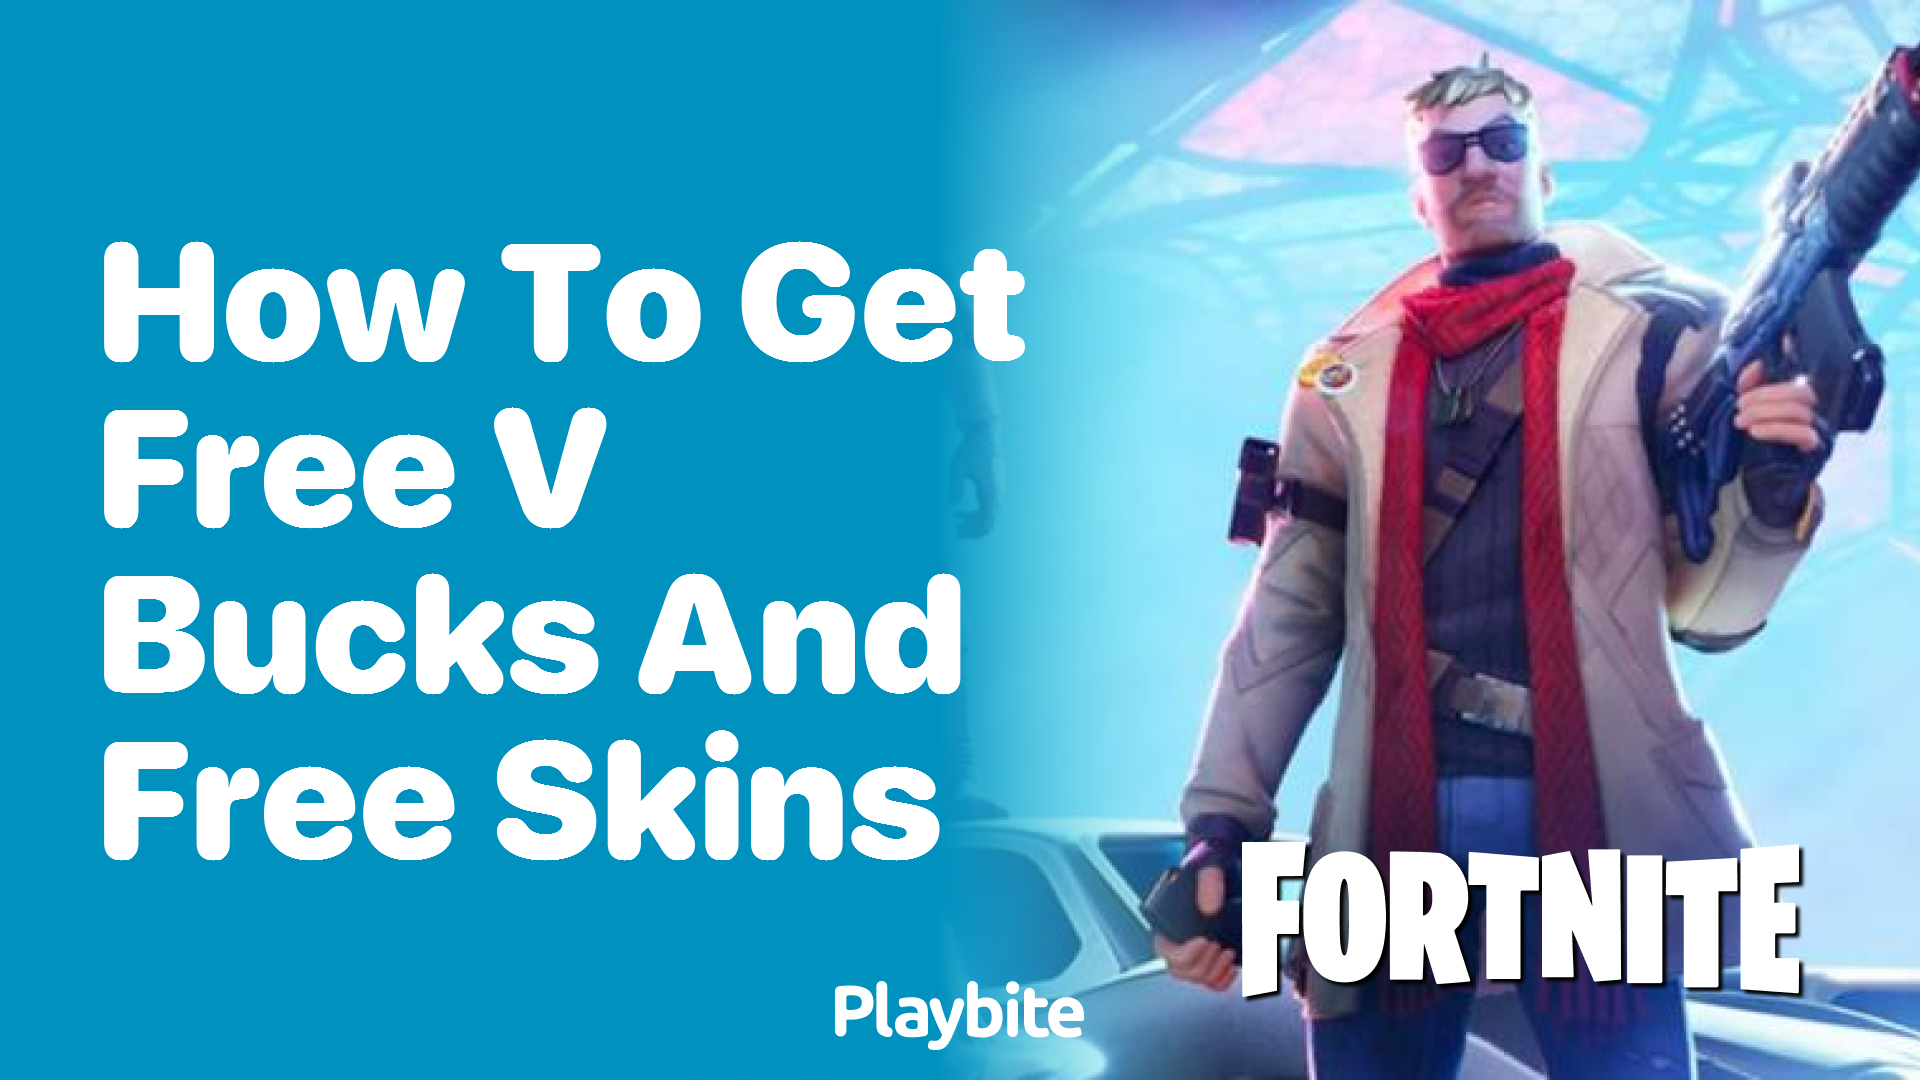 How to Get Free V-Bucks and Free Skins in Fortnite